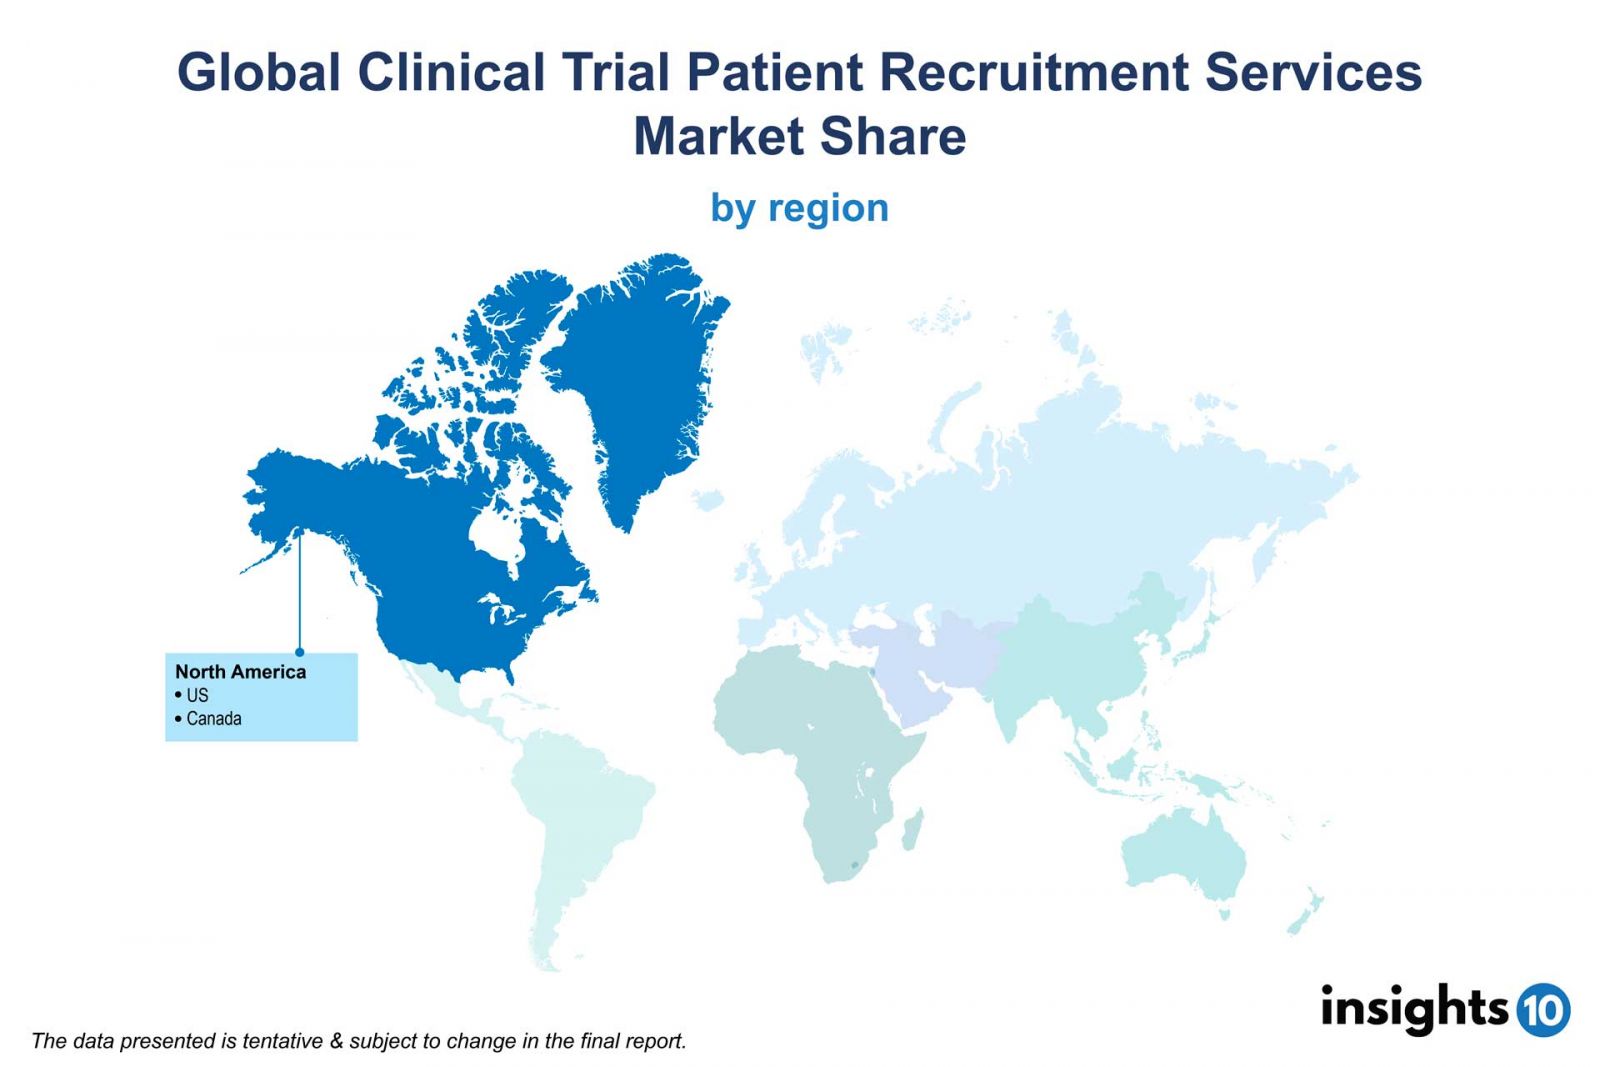 global clinical trial patient recruitment services market segmentation by region